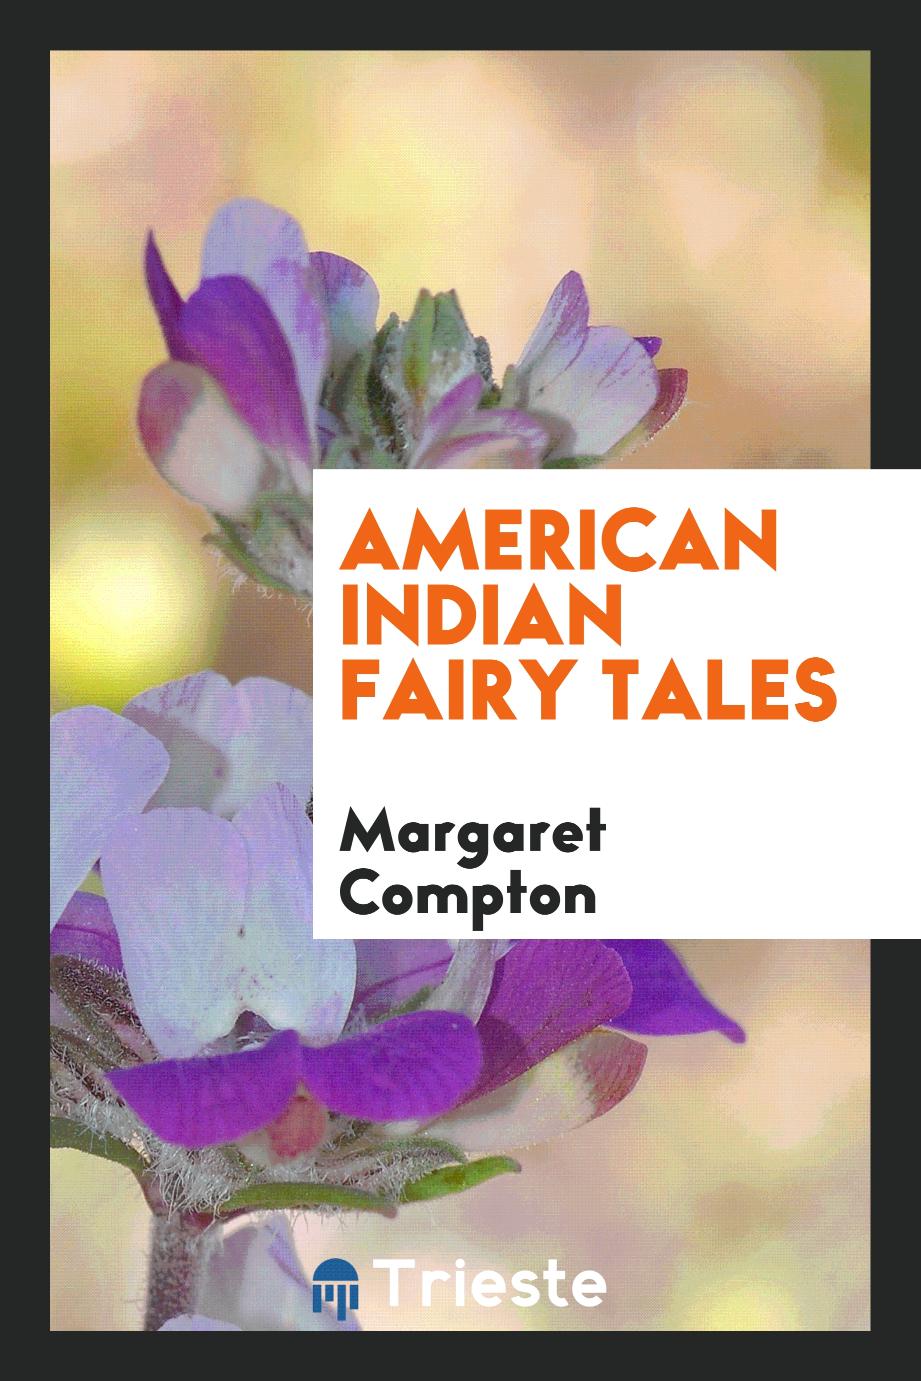 American Indian fairy tales